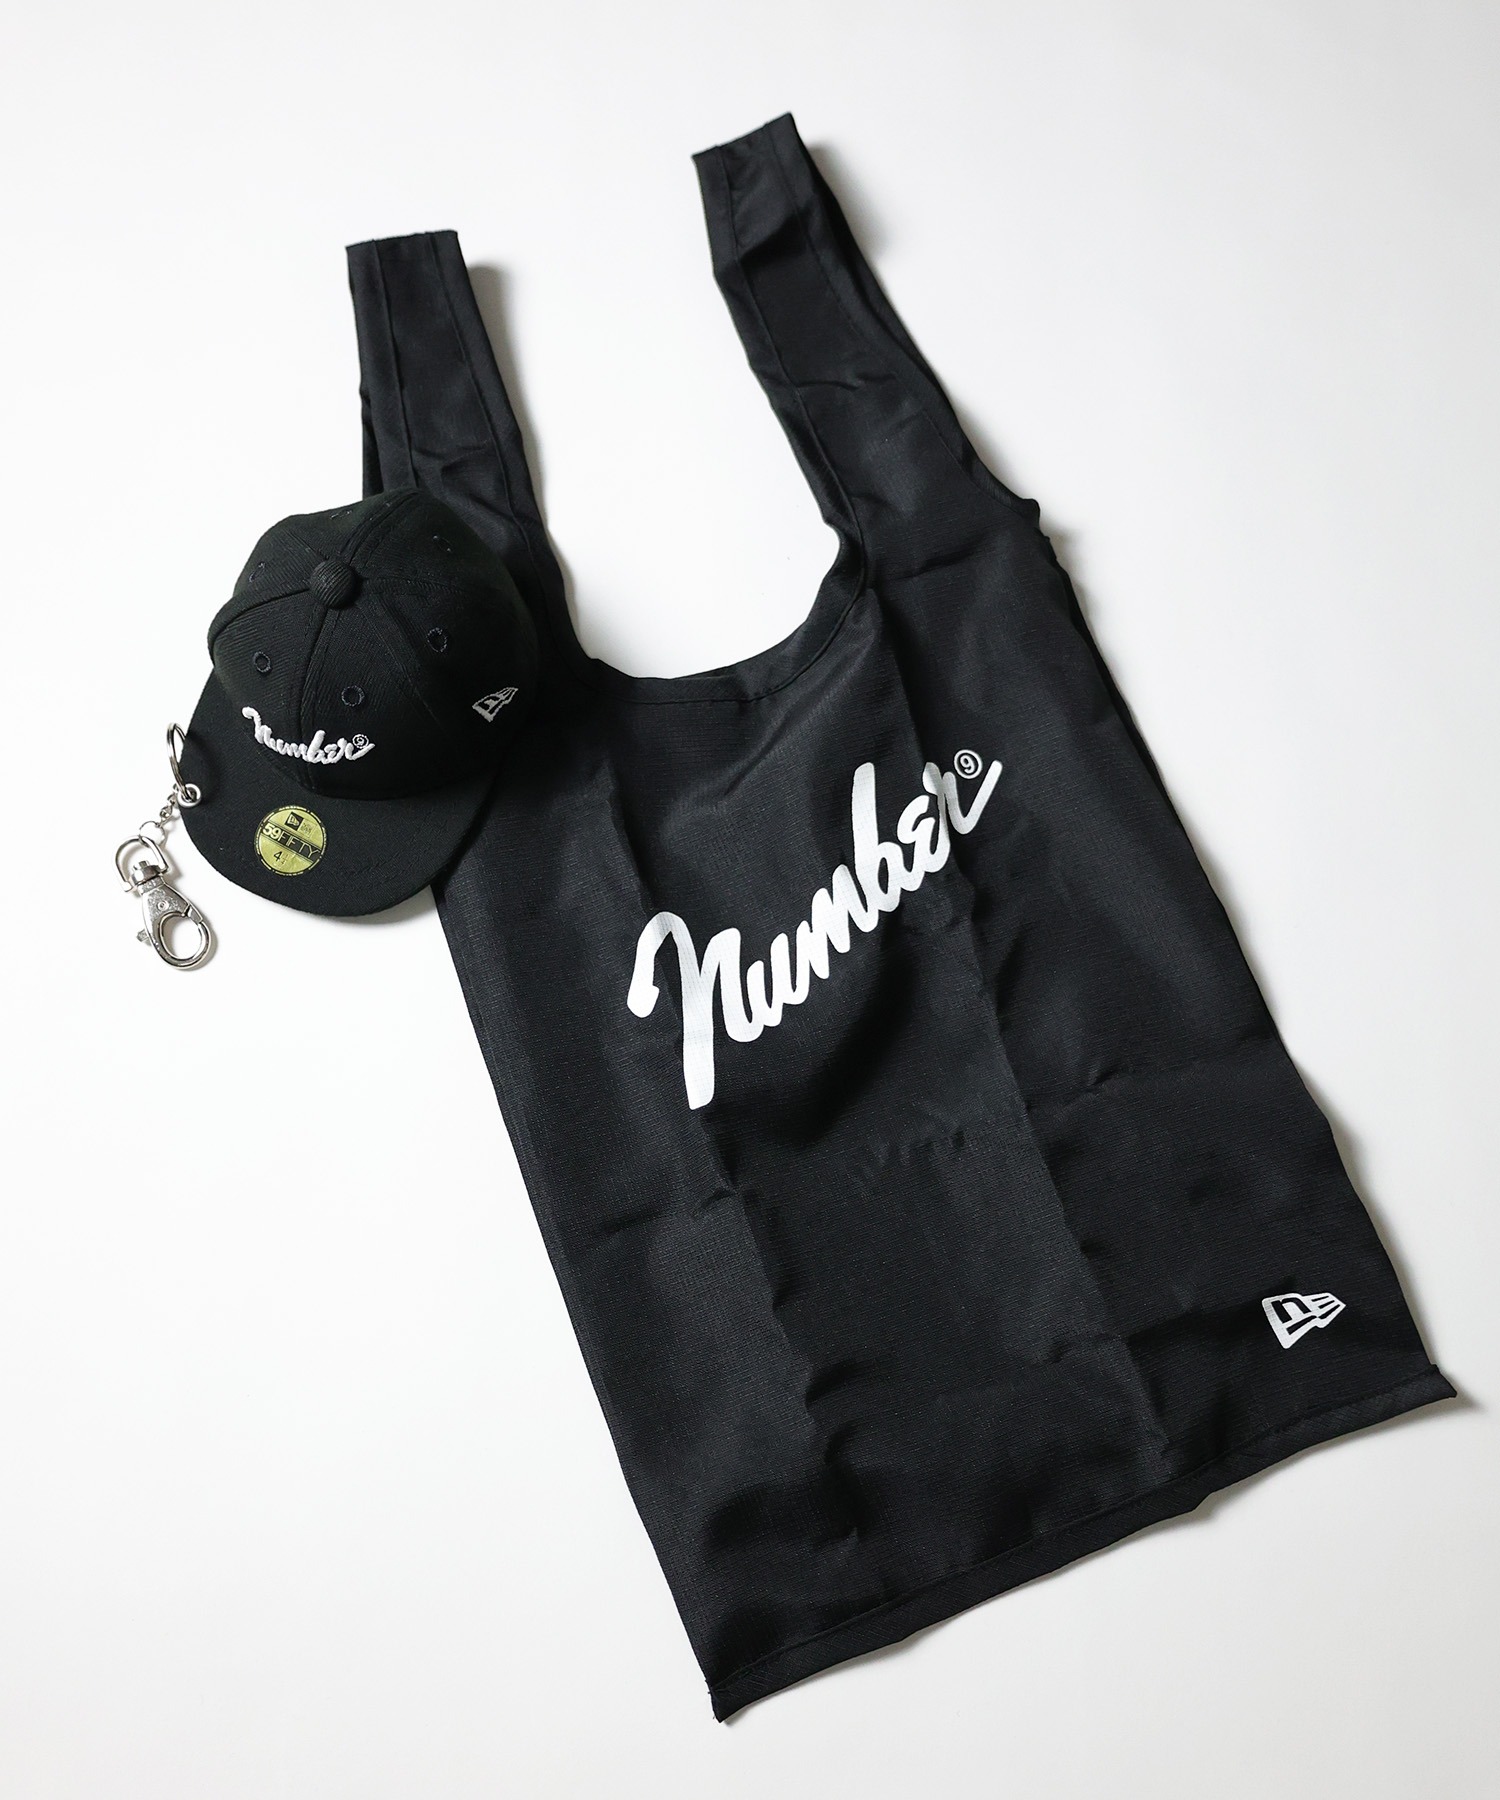 NUMBER (N)INE×NEW ERA / ナンバーナイン ニューエラ  Cap Pouch ECO Bag   number⑨ / Cap Pouch S w/MINI ECO TOTE NUMBER (N)INE SCRIPT/キャップポーチ エコ トートバック